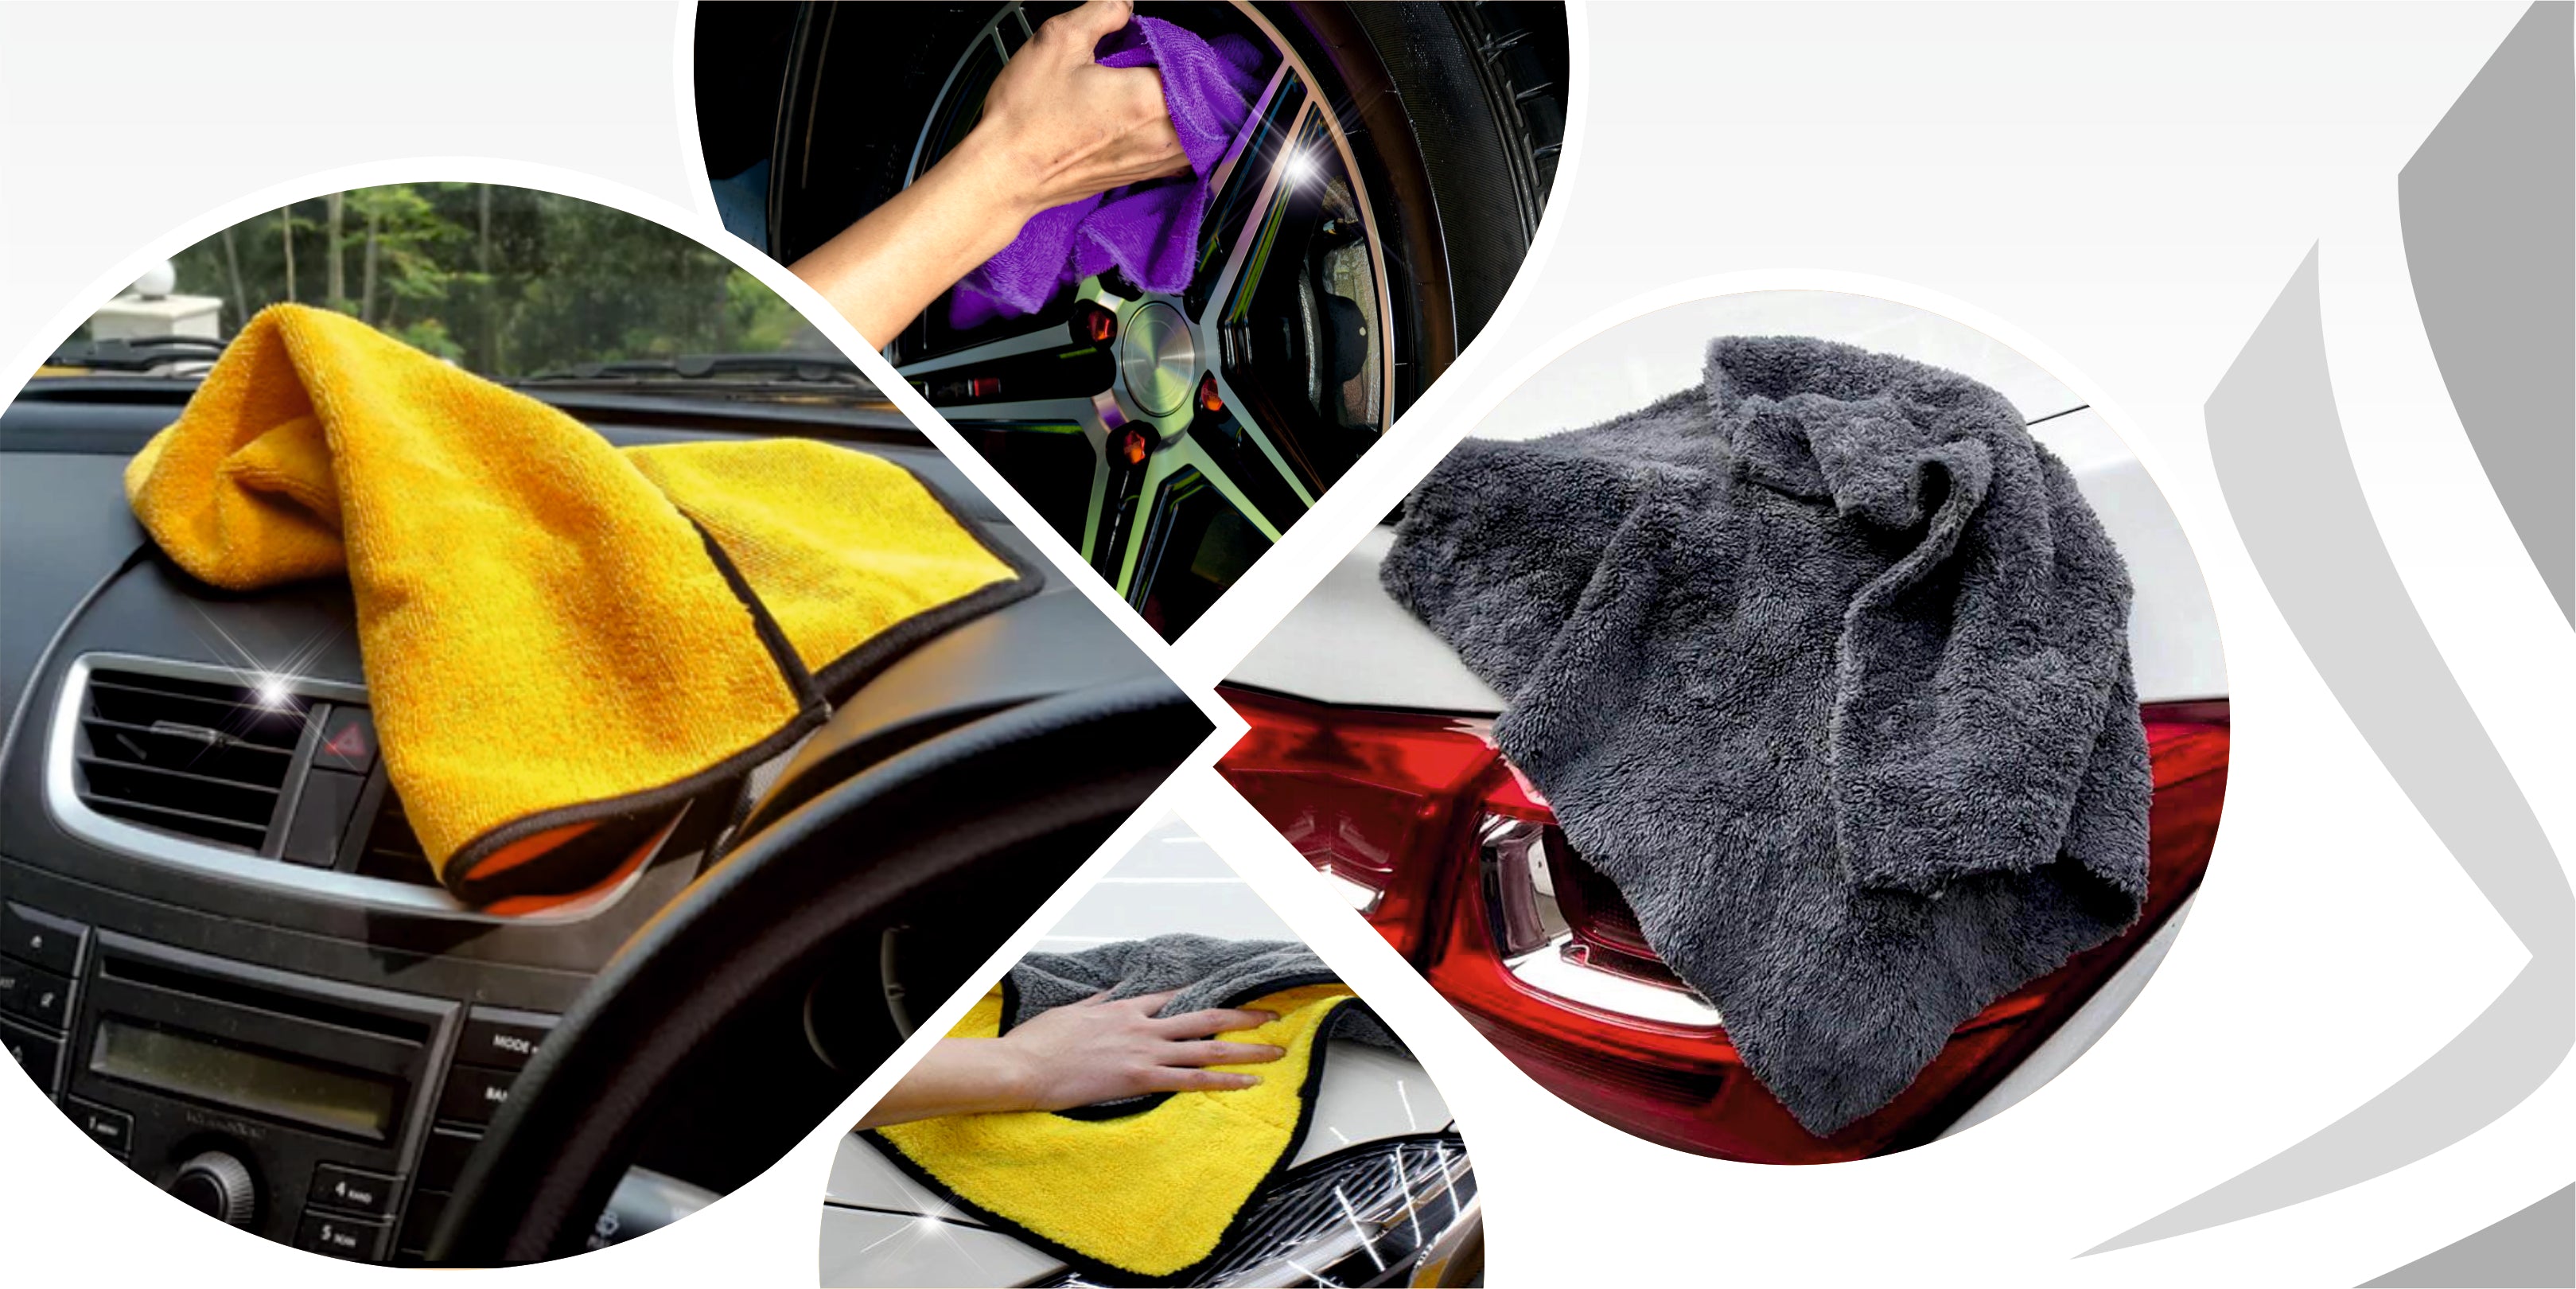 Specialized Microfiber Cloths for Car cleaning and detailing by Sobby –  sobby